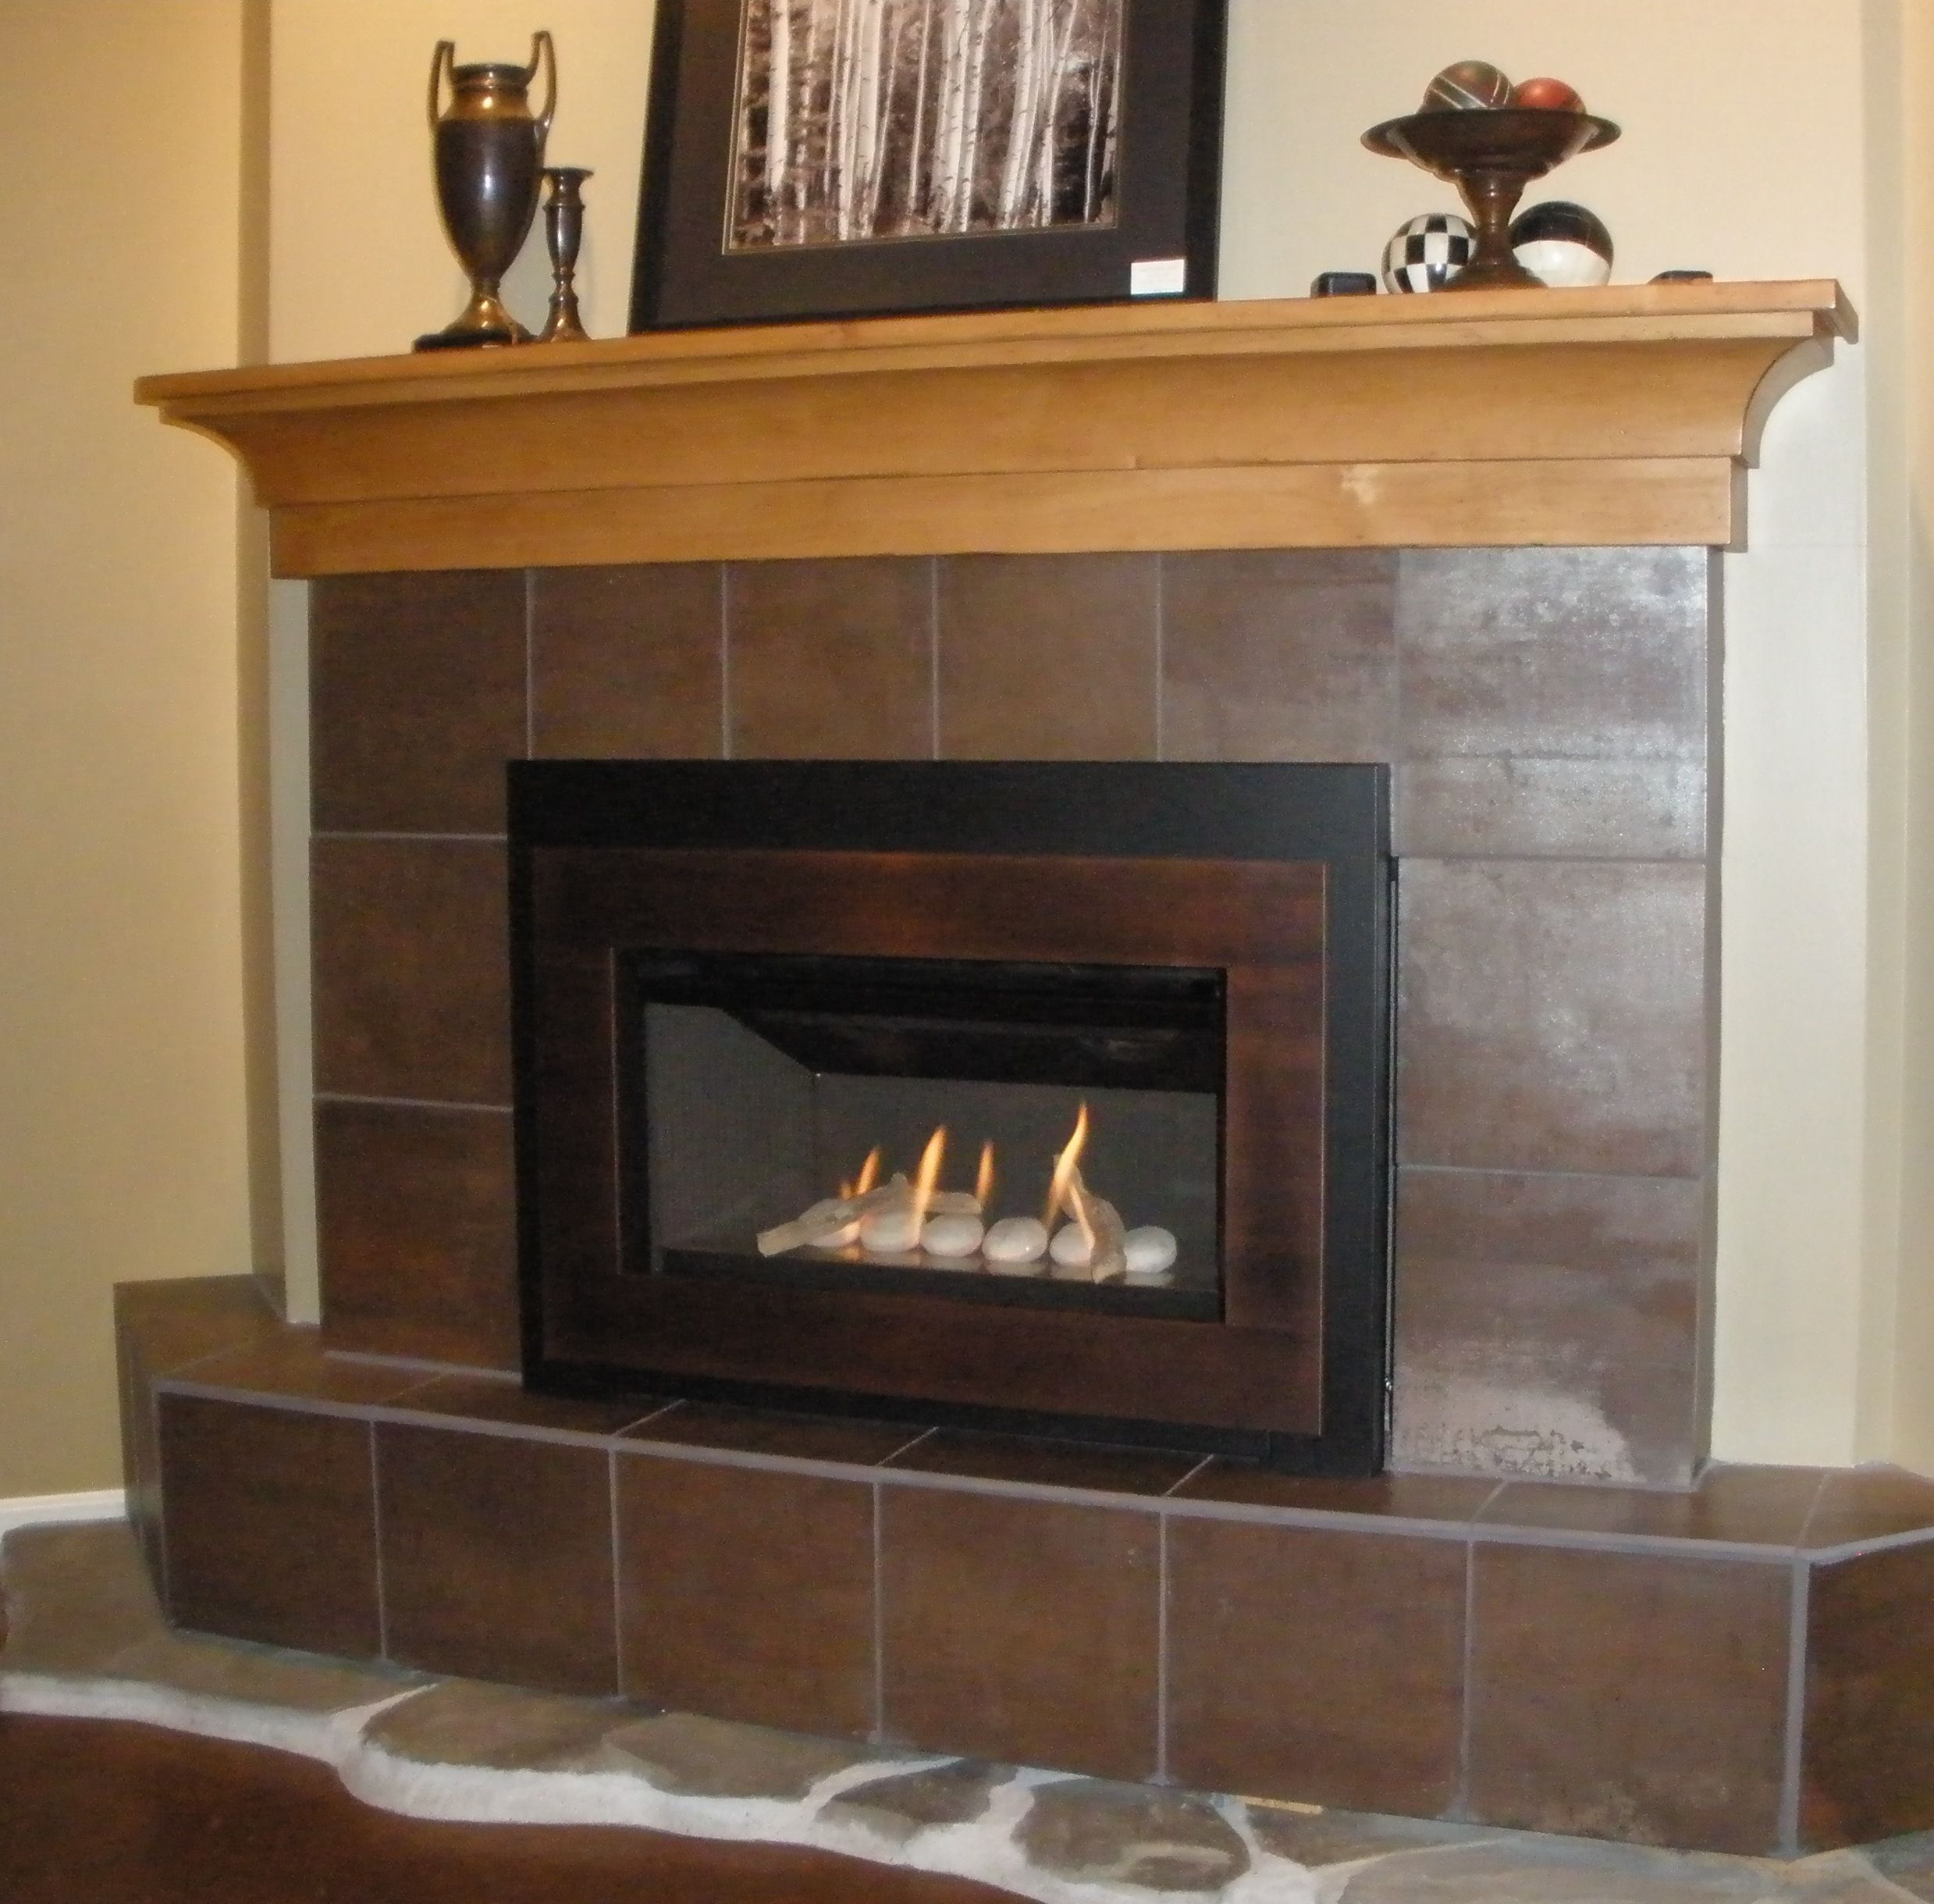 Northwest Electric Fireplace Best Of Pin On Valor Radiant Gas Fireplaces Midwest Dealer